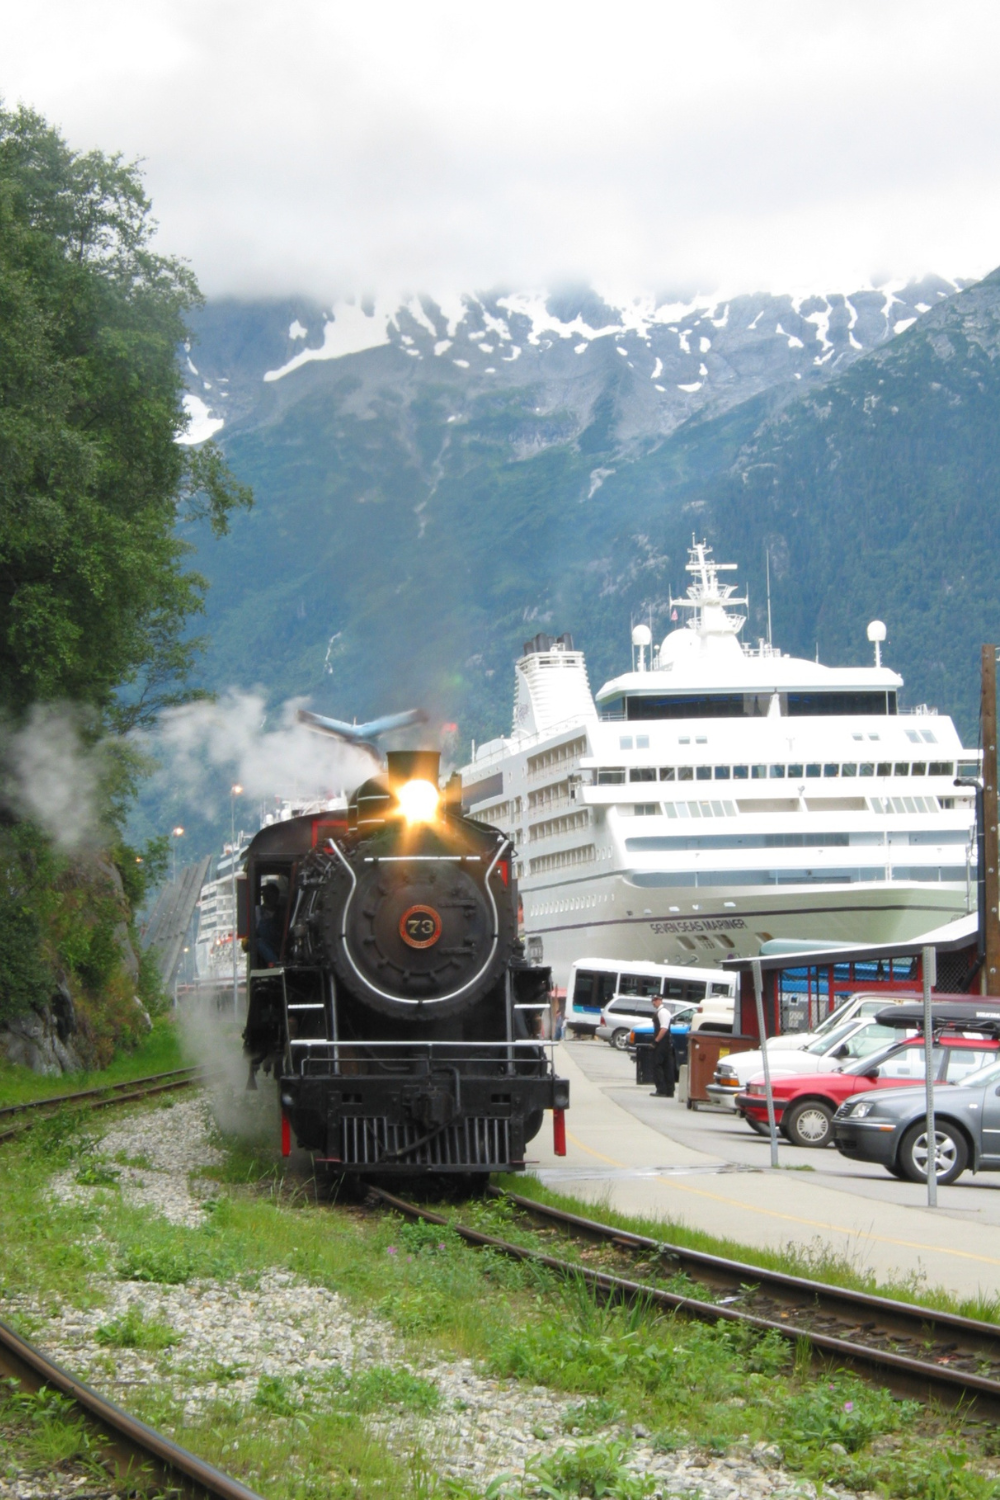 Skagway Excursions | How to Spend One Day in Skagway, Alaska